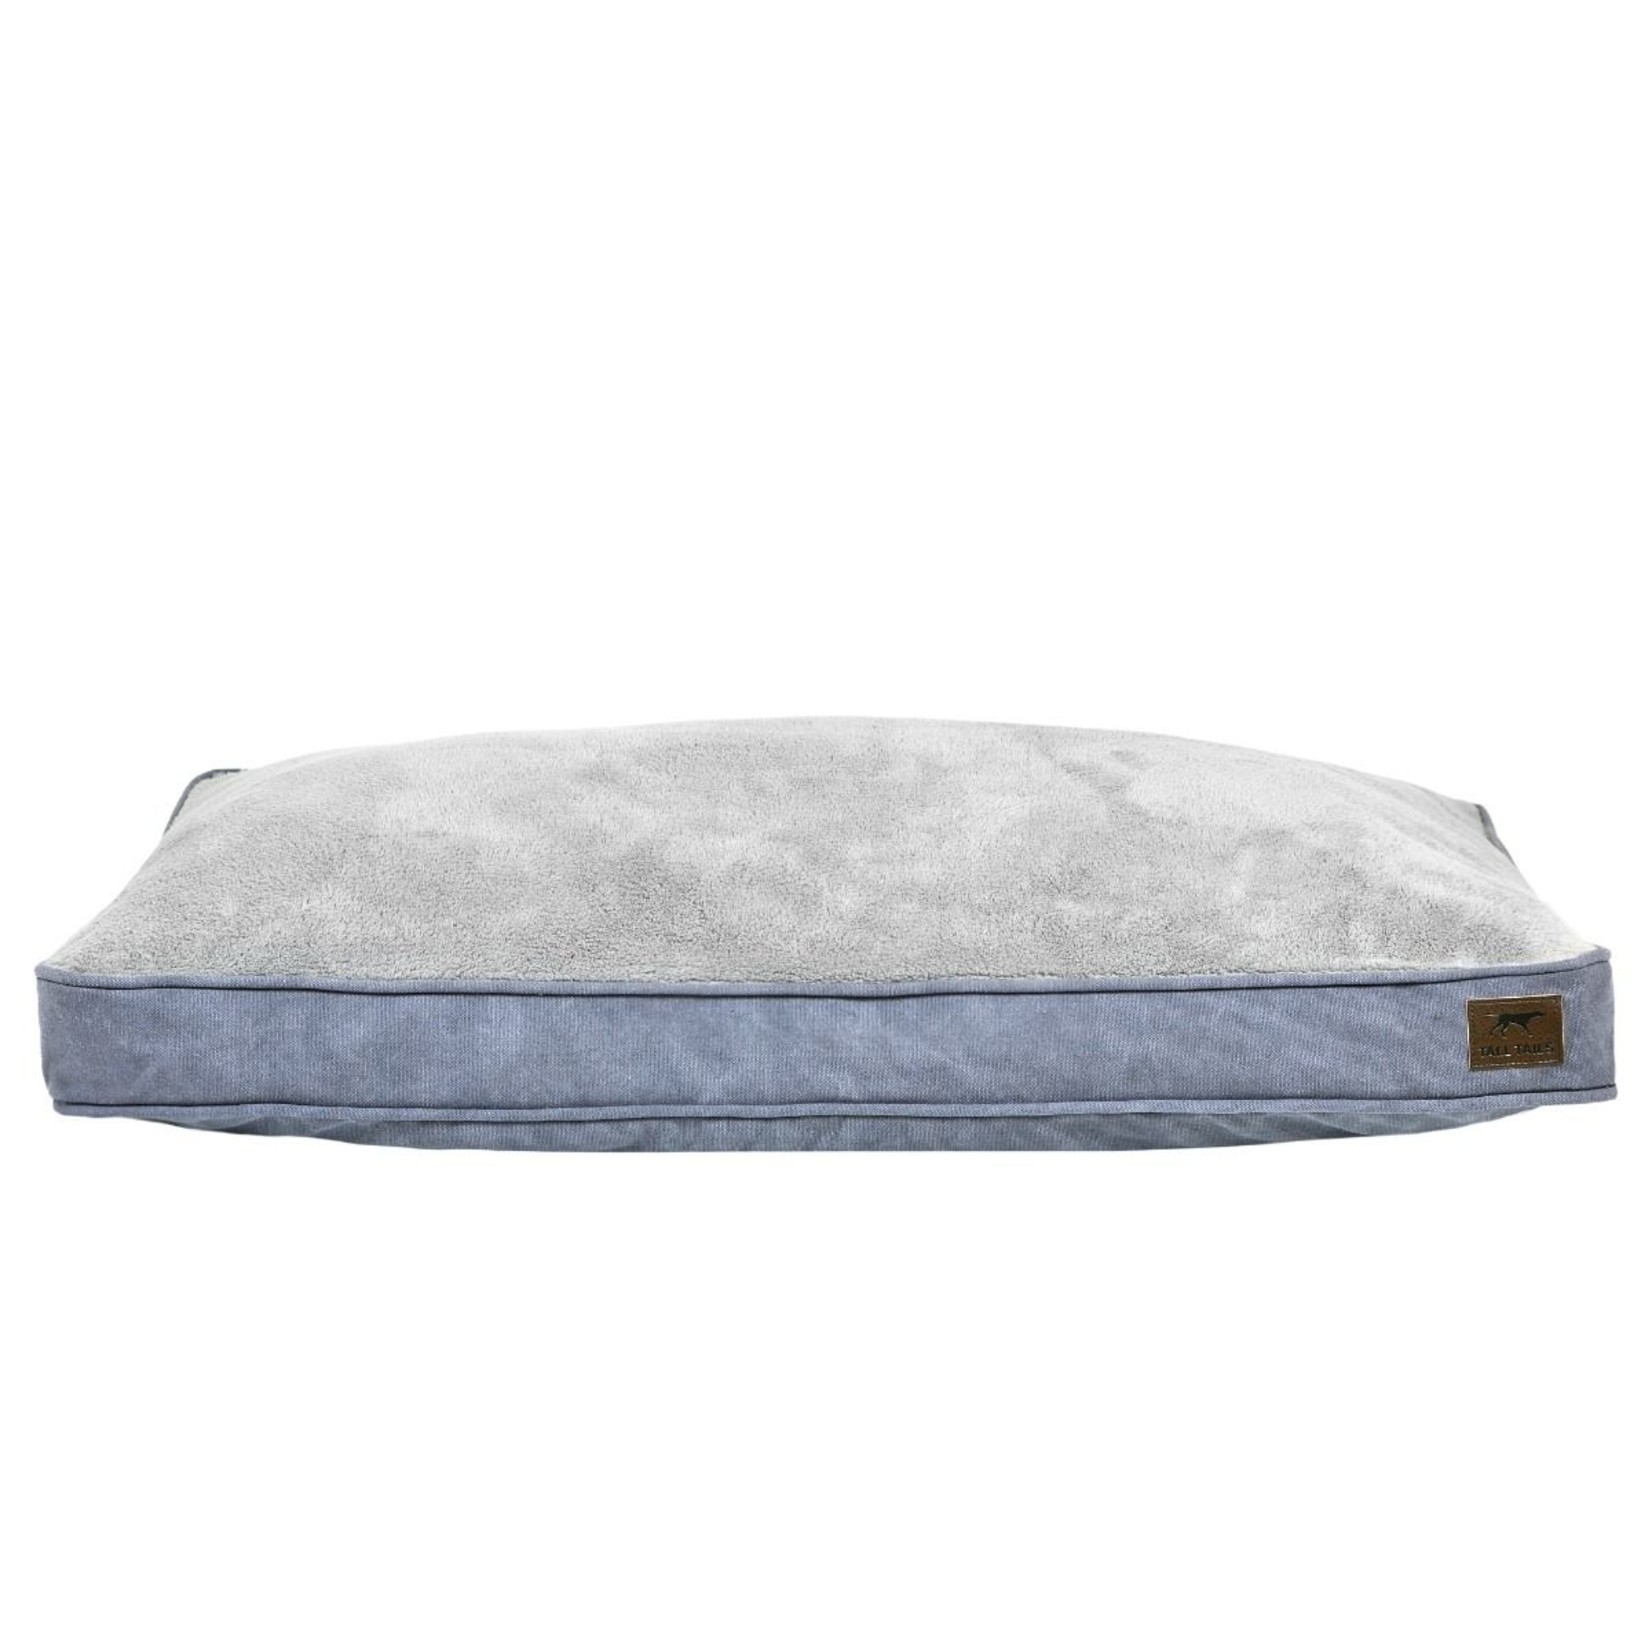 Tall Tails Tall Tails Dream Chaser Charcoal Cushion Bed Medium